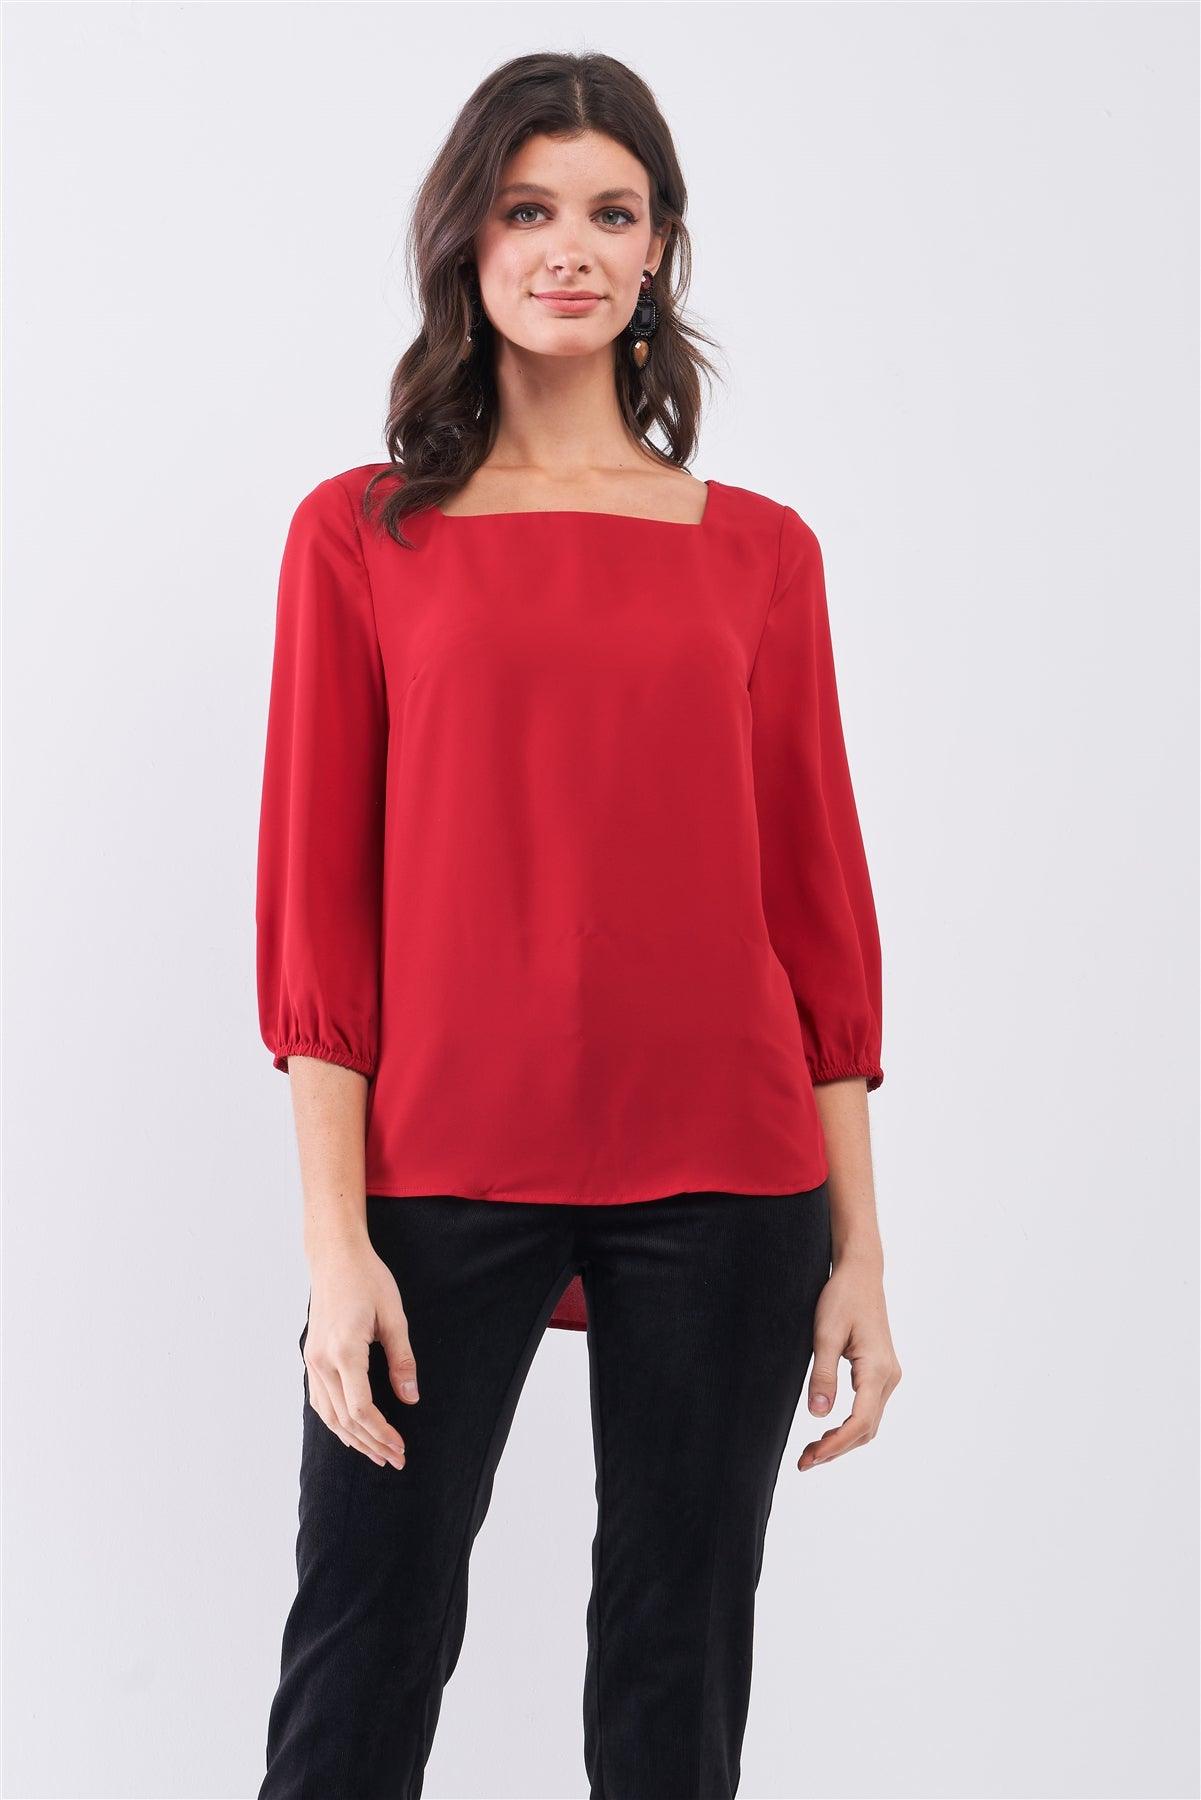 Red Square Neck 3/4 Puff Sleeve With Elasticated Hem Loose Fit Top